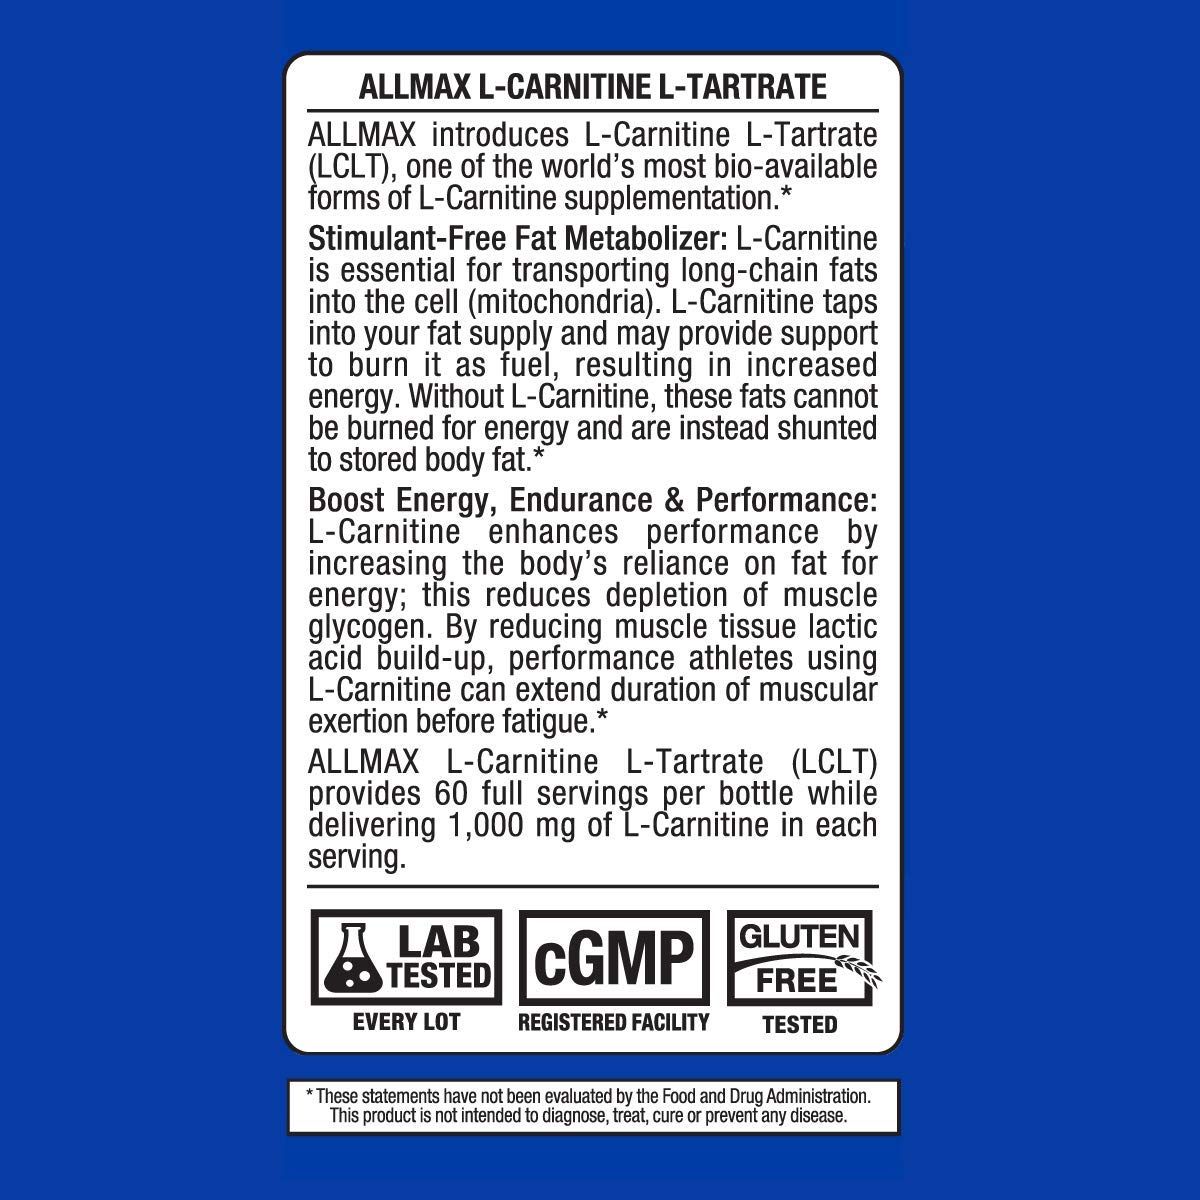 ALLMAX Essentials L-CARNITINE TARTRATE - 120 Capsules - Stimulant-Free Metabolizer - Boosts Energy, Performance & Recovery - Gluten Free & Vegetarian - 60 Servings